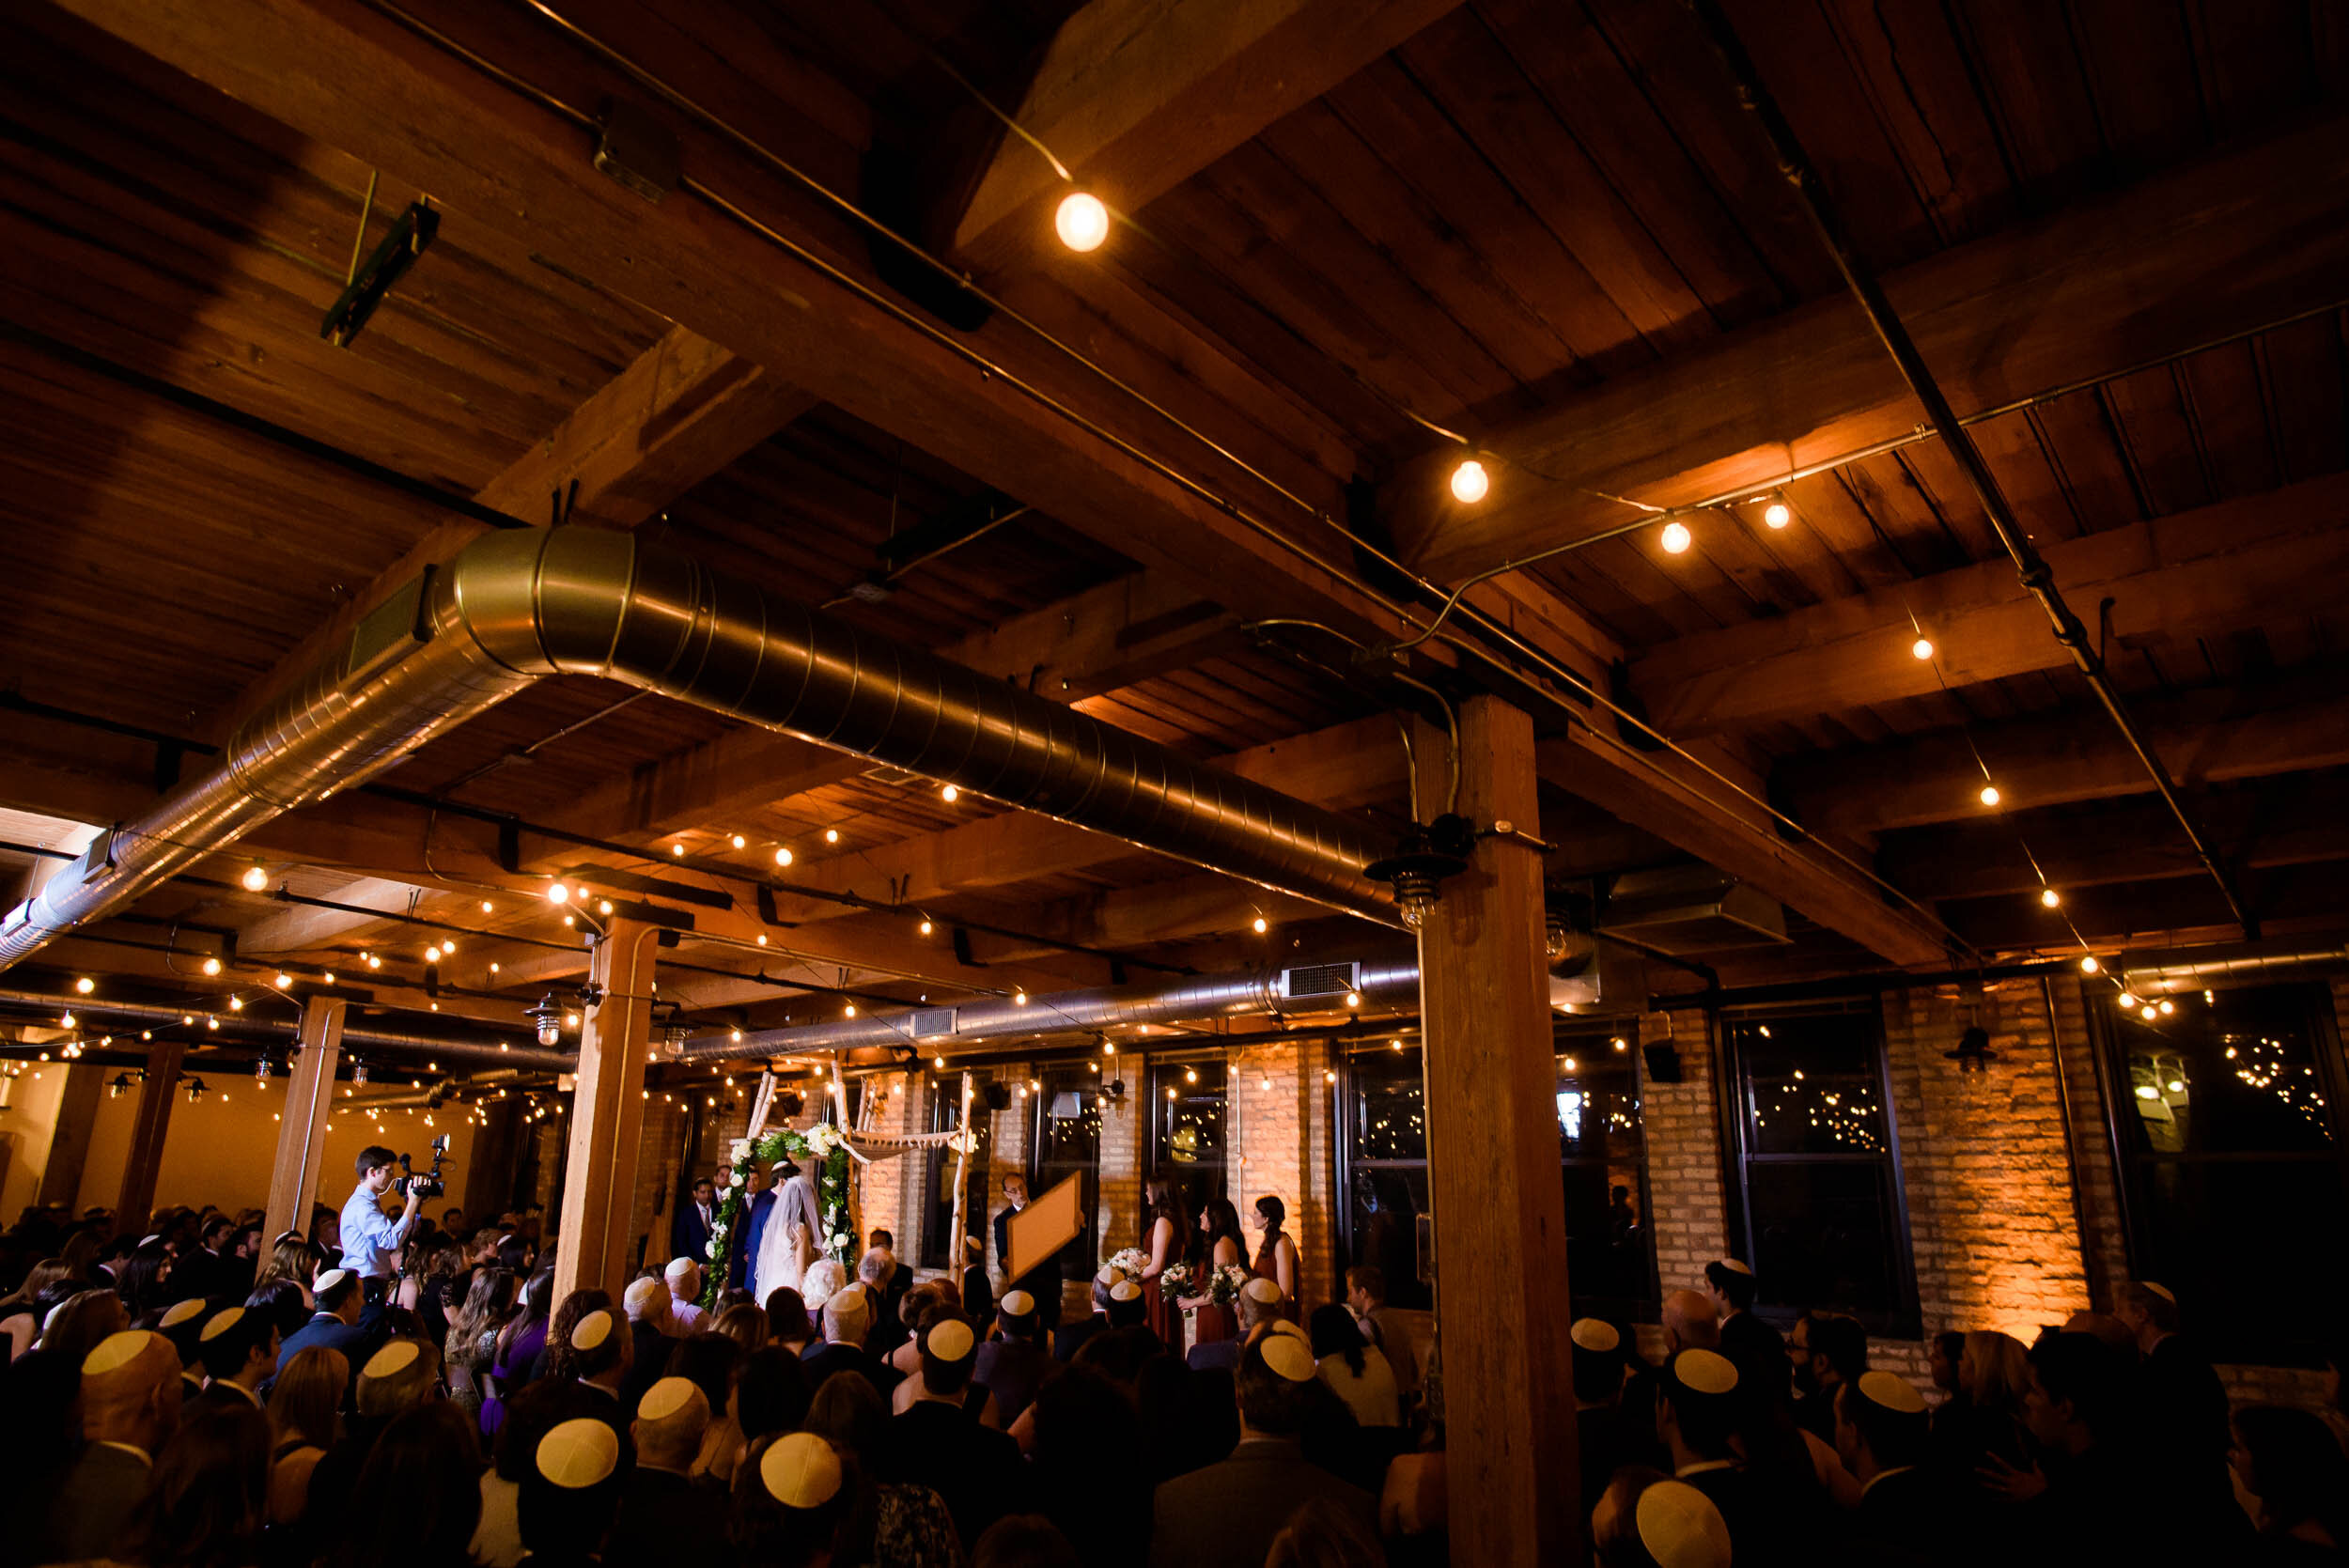 Jewish ceremony photo: Ravenswood Event Center Chicago wedding captured by J. Brown Photography.  